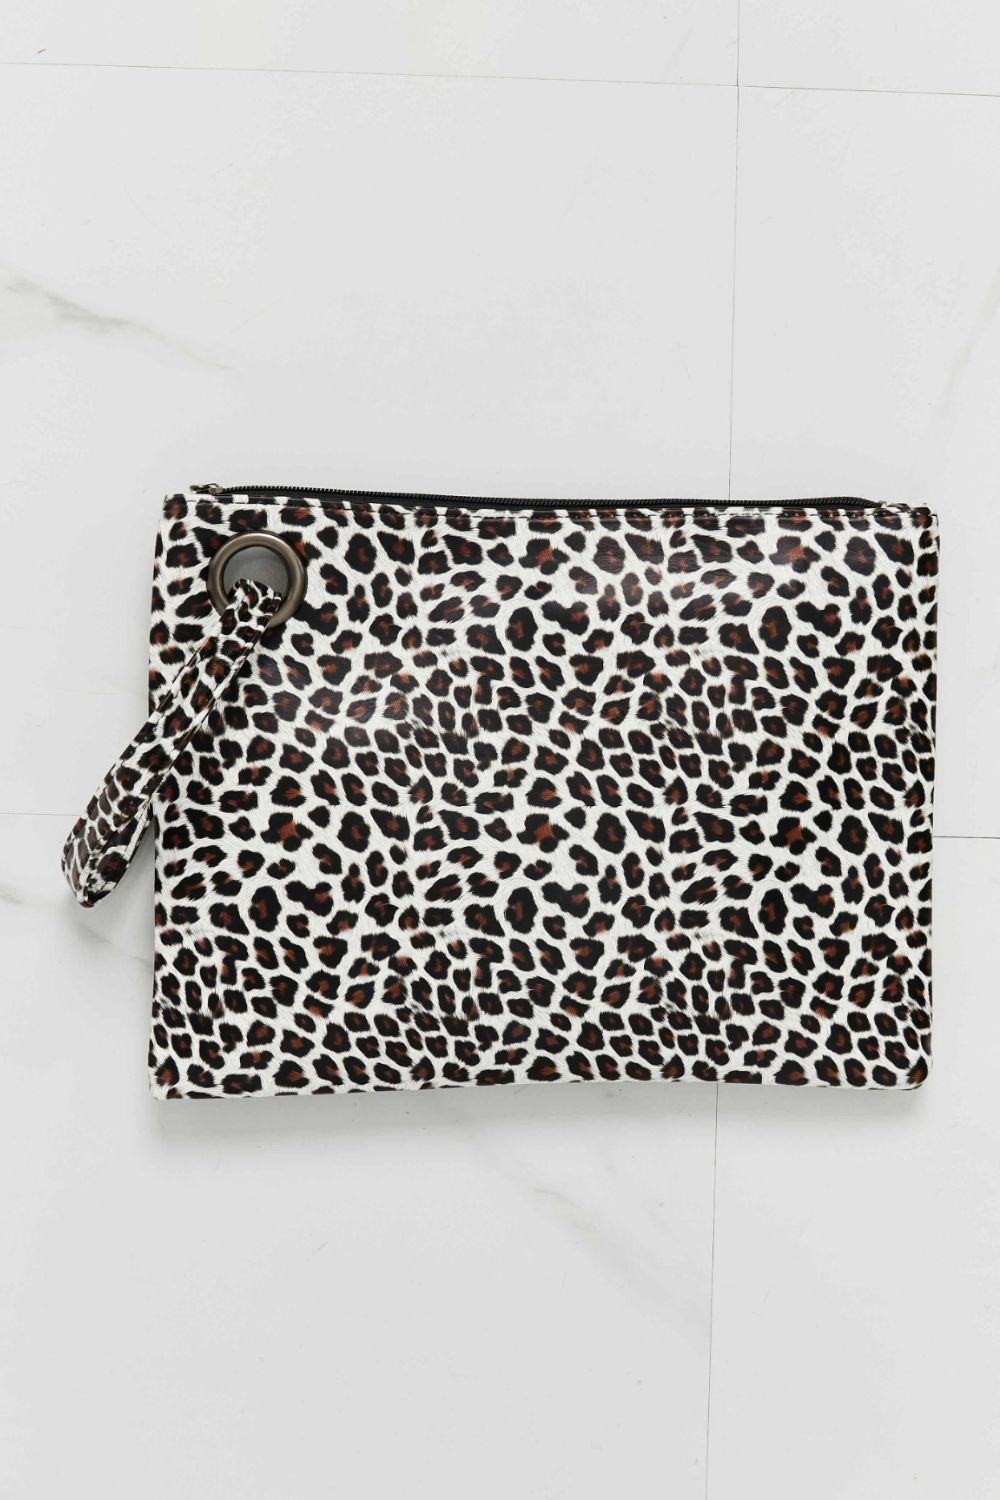 Make It Your Own Wristlet